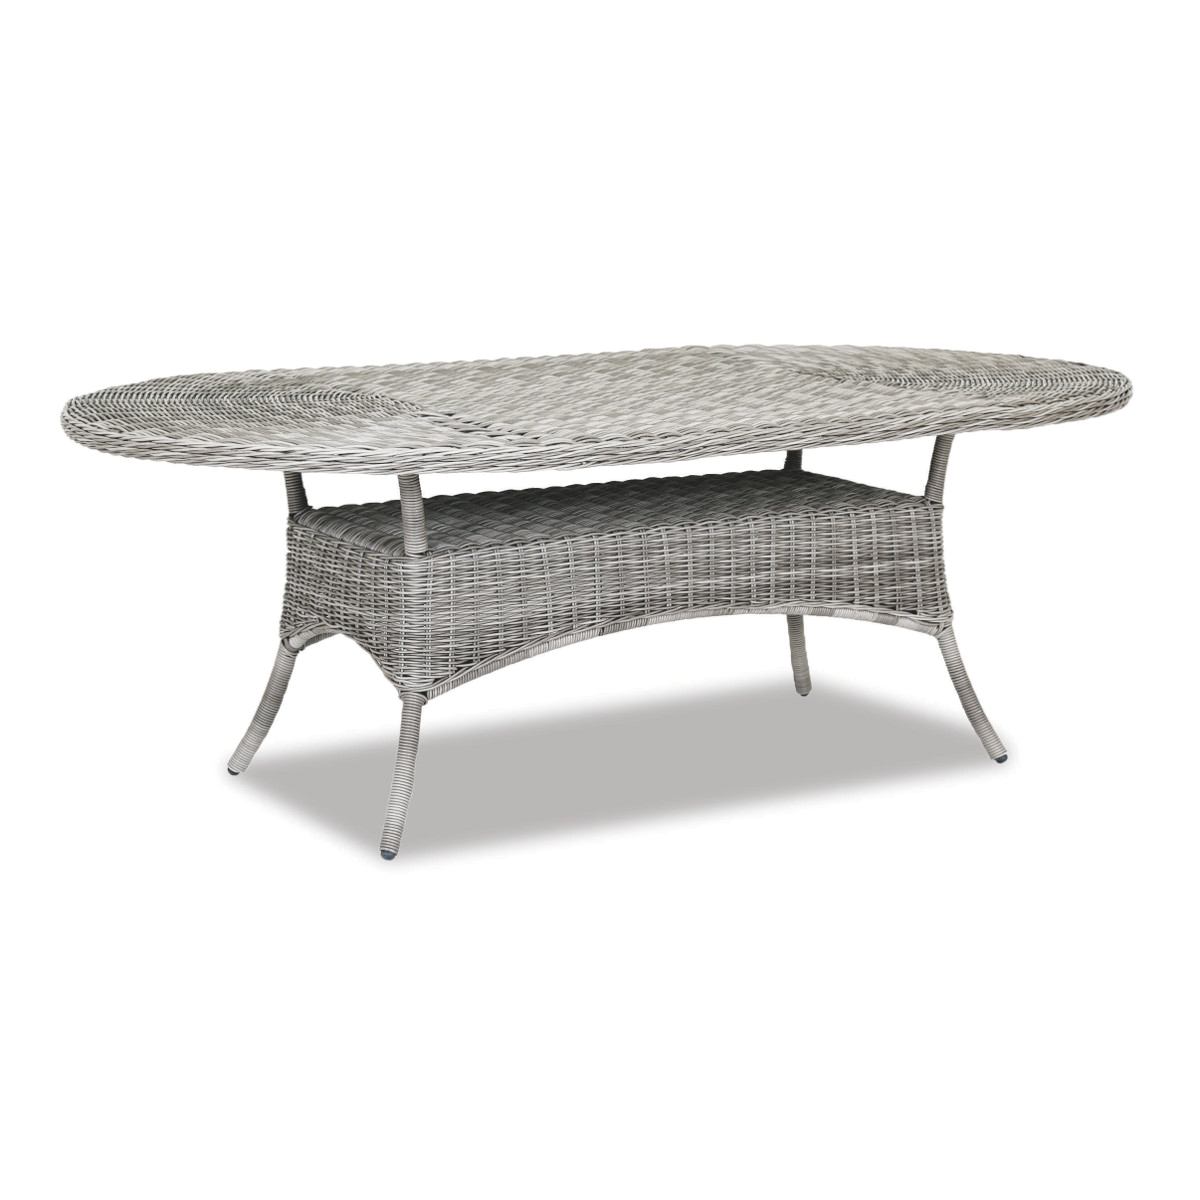 84 la costa oval dining table